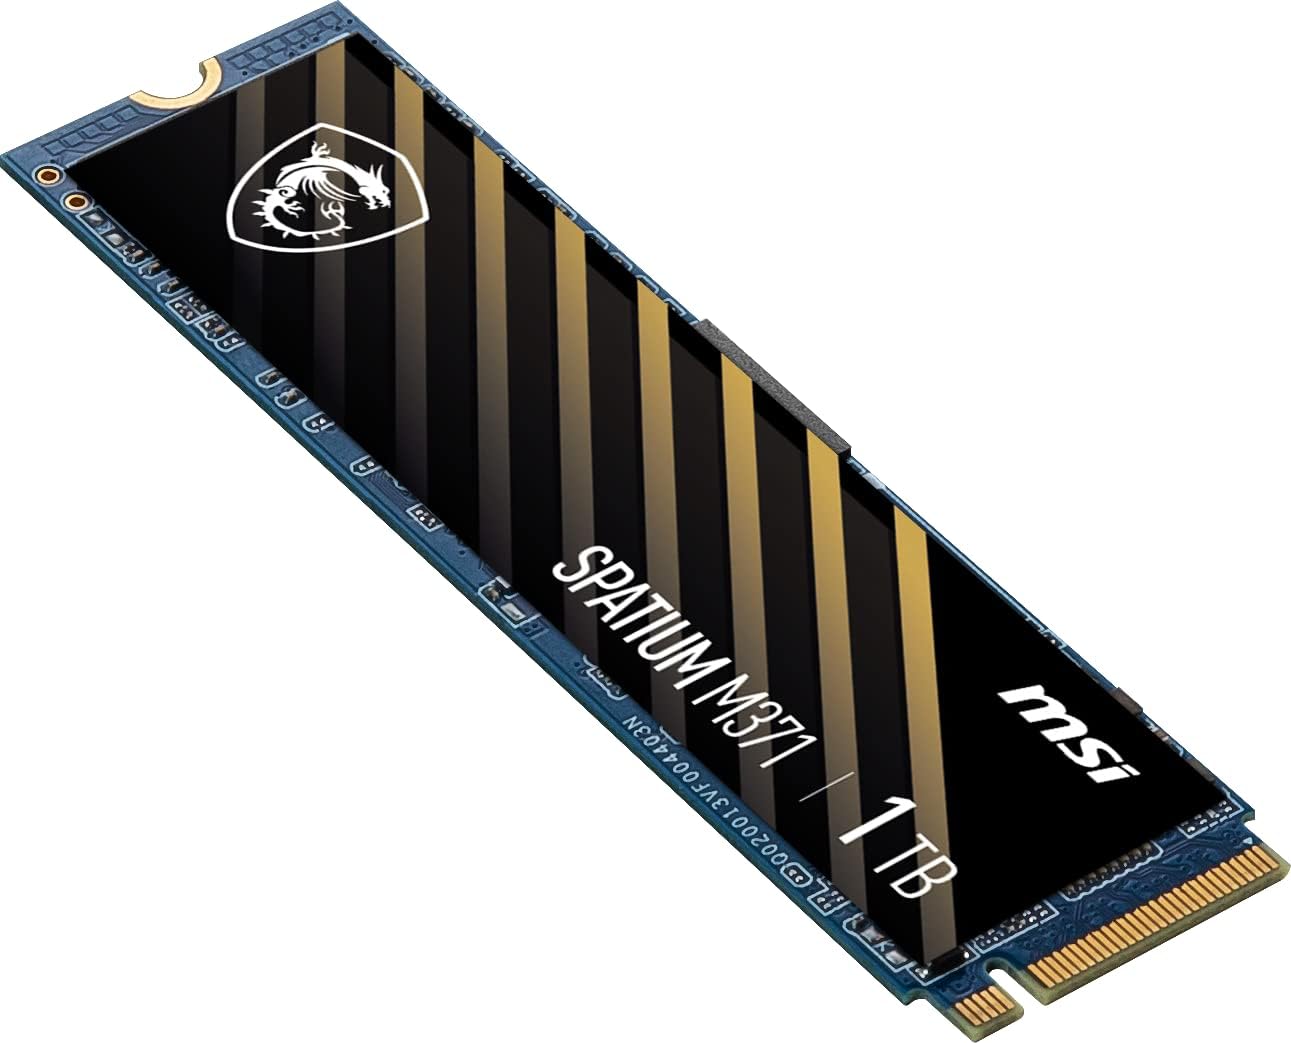 MSI SPATIUM M371 NVMe M.2 1TB - PCIe 3x4 NVMe M.2 Internal Solid State Drive, 2350MB/s Read  1700MB/s Write, 3D NAND, Built-in Data Security, Center - 5 Year Warranty (210 TBW)